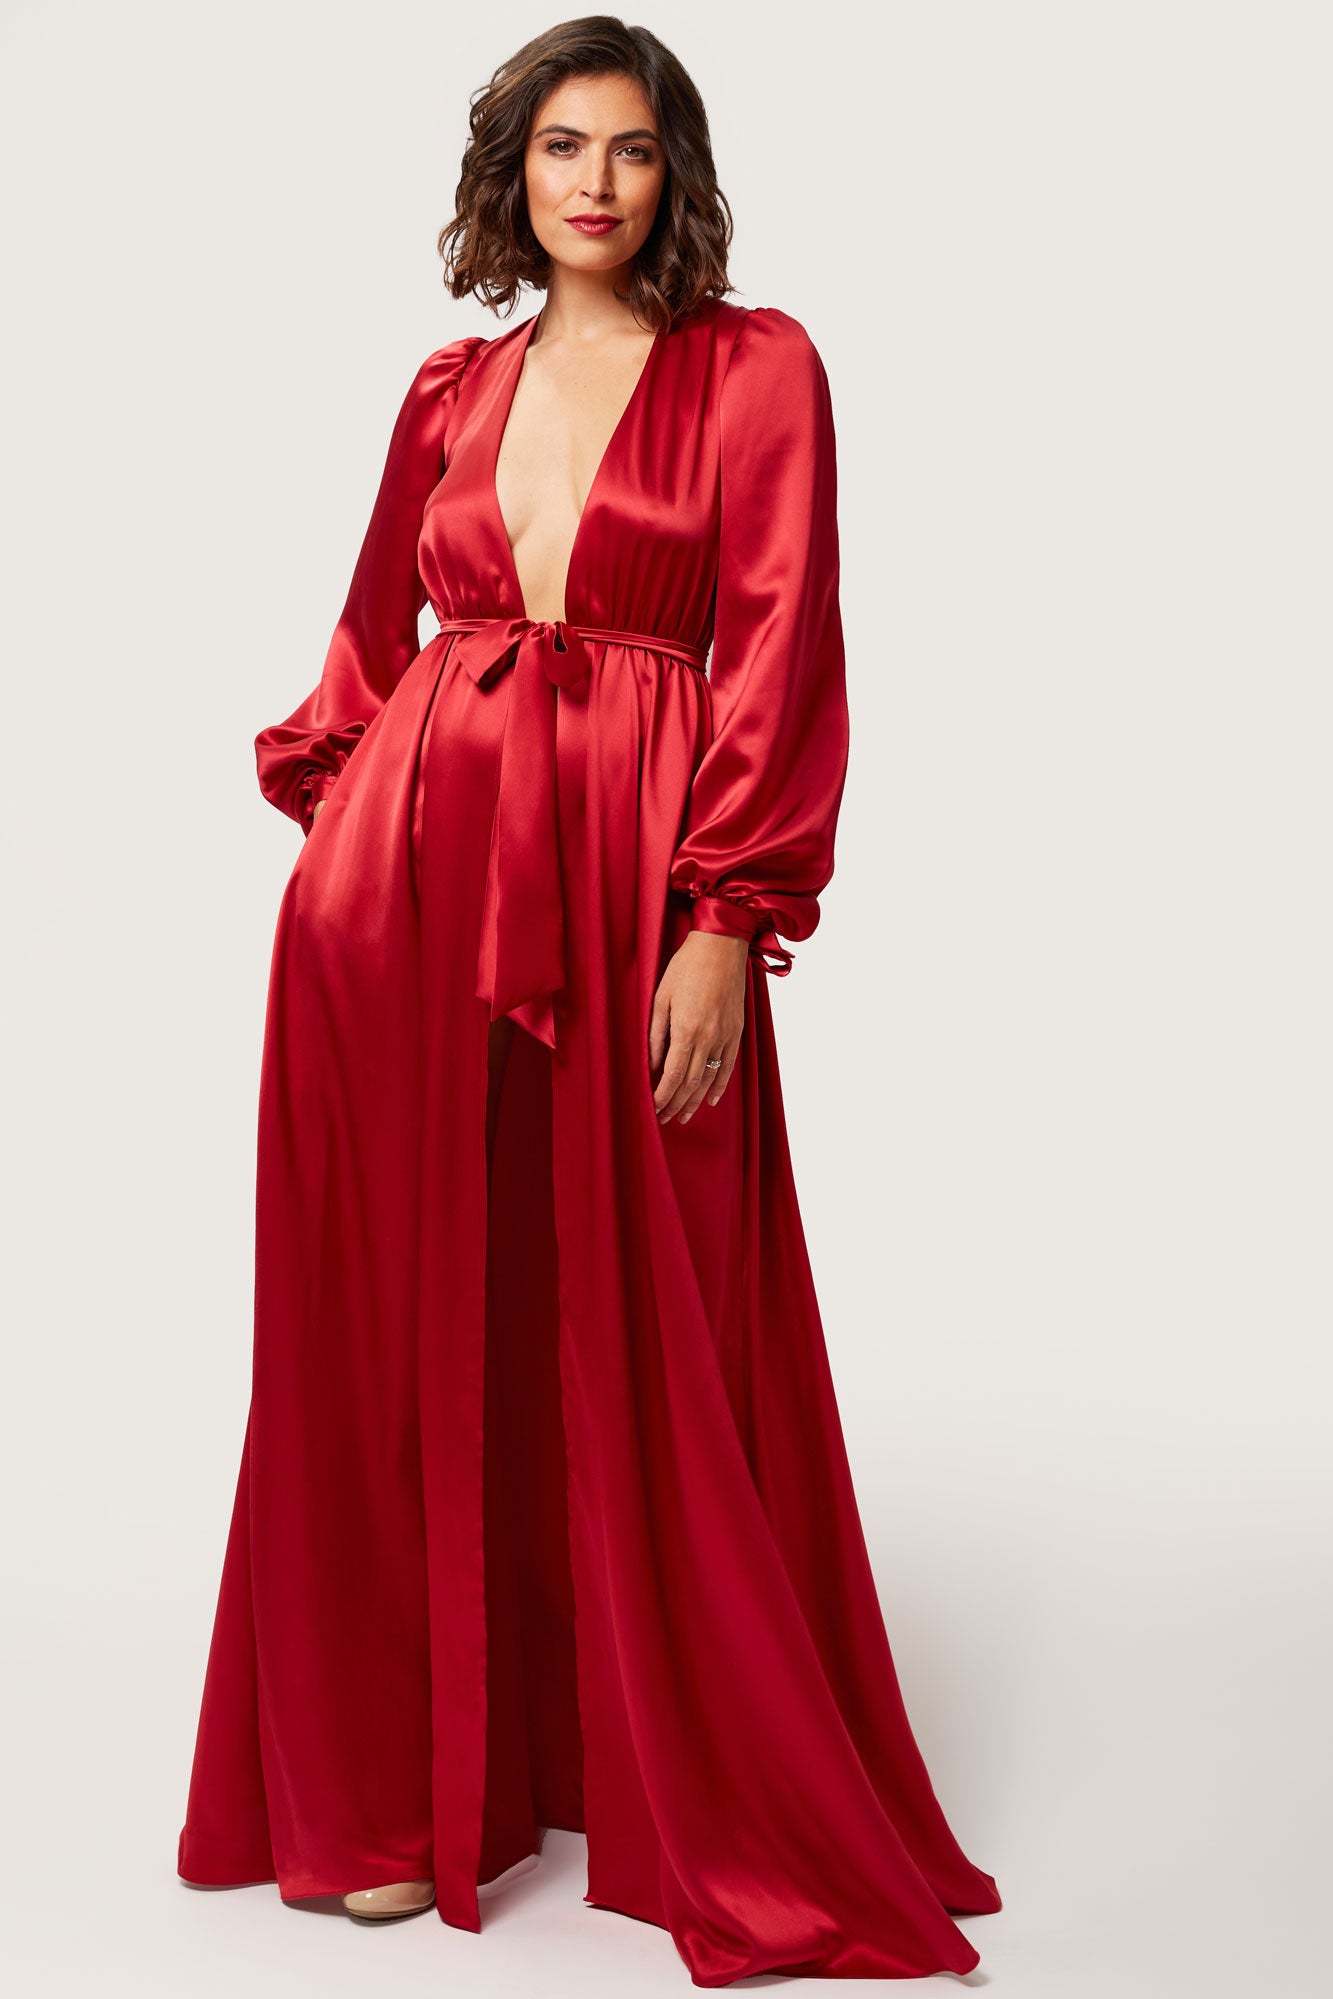 Red silk Simone robe and floor-length dressing gowns in bright blood red